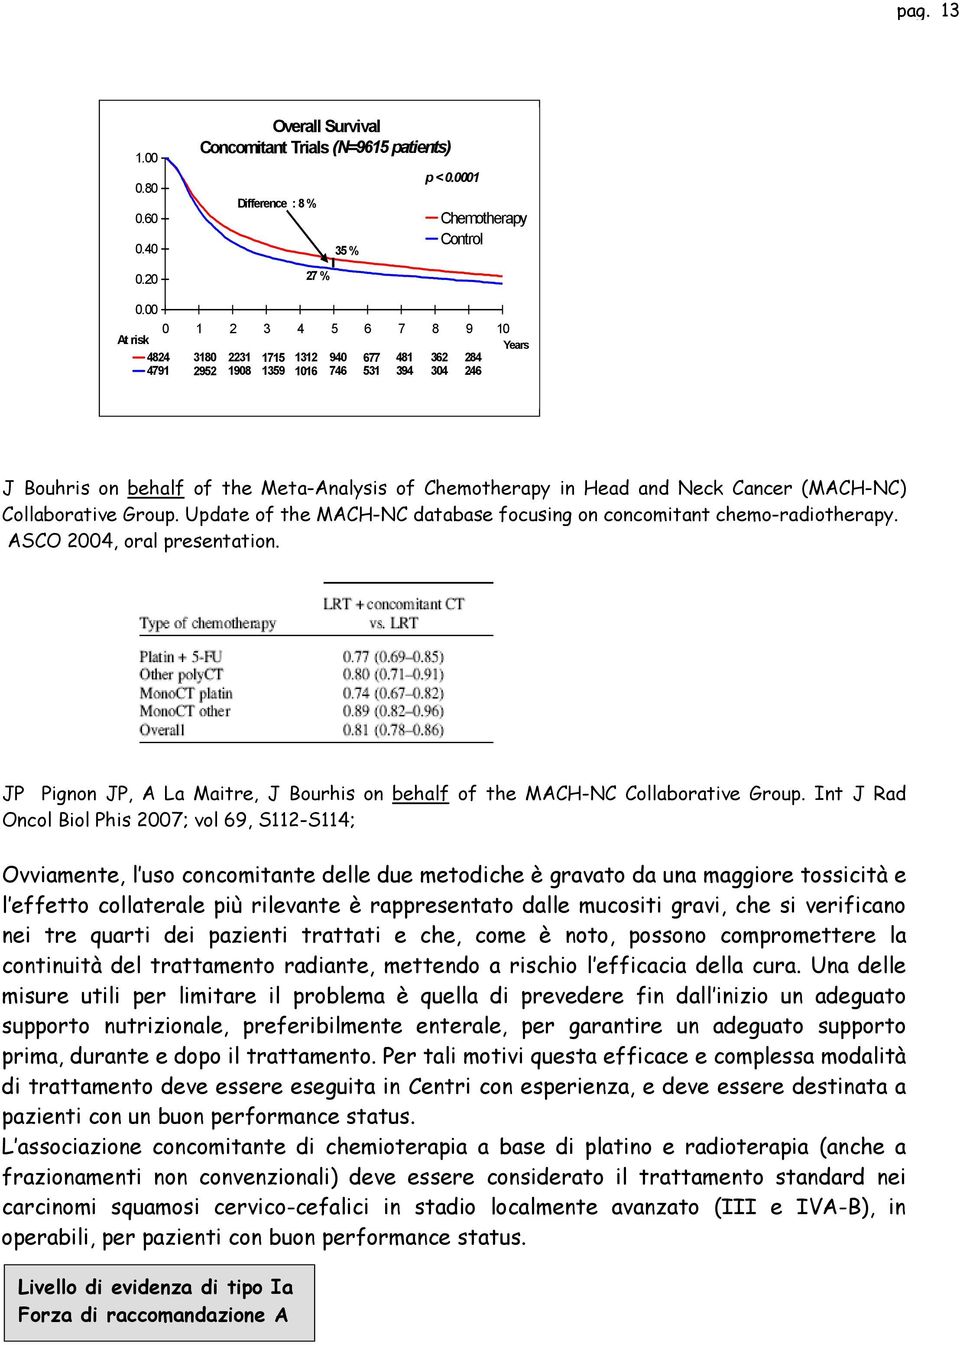 Neck Cancer (MACH-NC) Collaborative Group. Update of the MACH-NC database focusing on concomitant chemo-radiotherapy. ASCO 2004, oral presentation.